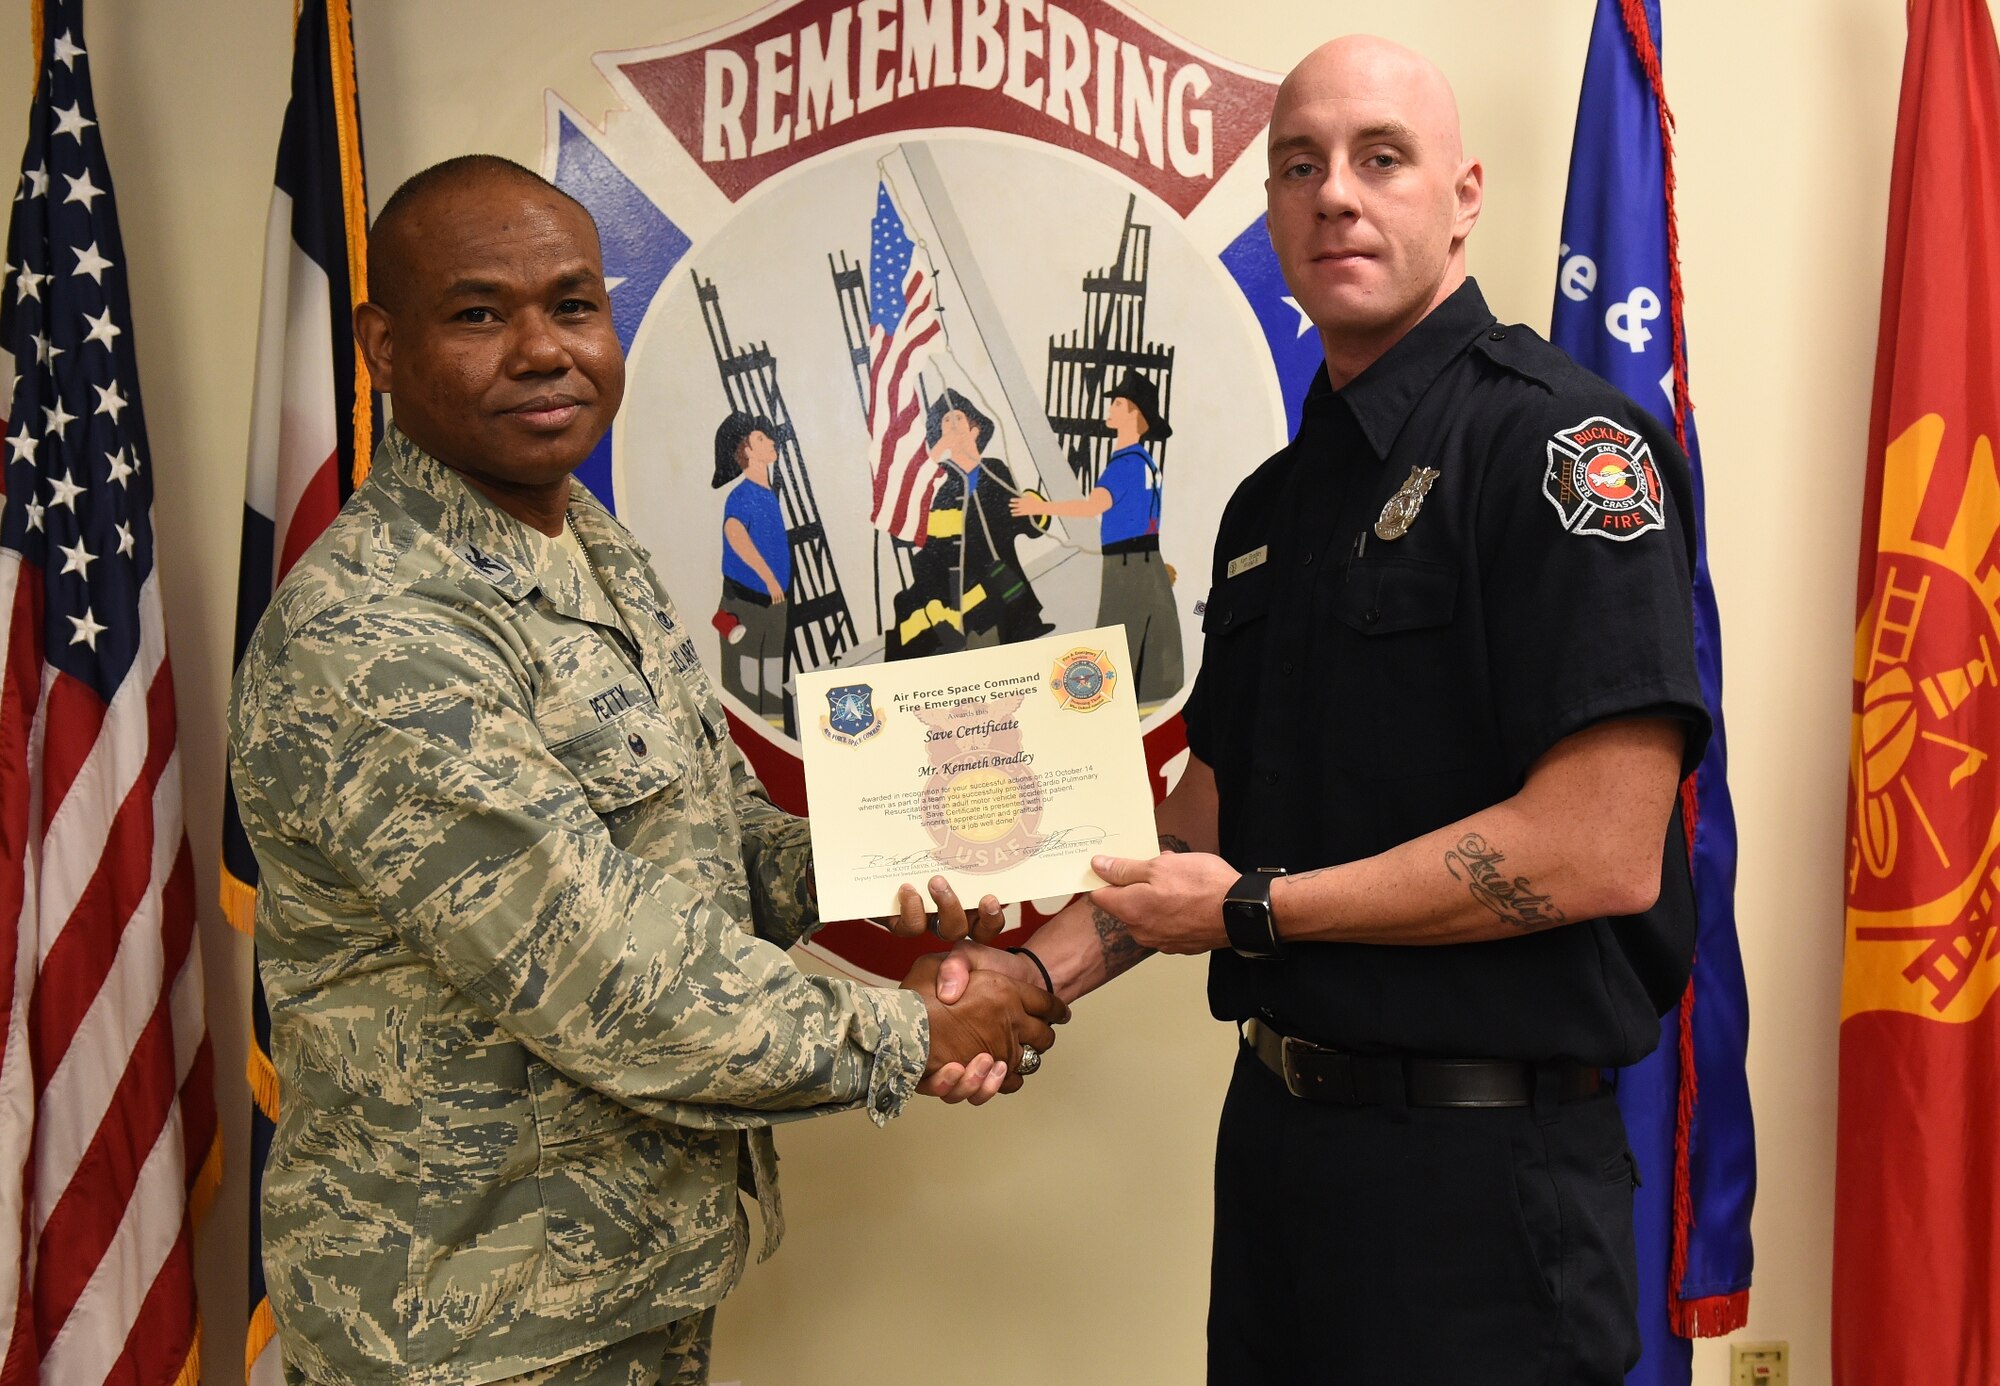 Kenneth Bradley, Buckley Fire Emergency Services, receives an Air Force Space Command Fire Emergency Services Save Certificate from Col. George Petty, AFSPC Civil Engineer Readiness and Emergency Management chief, Nov. 20, 2014, at the fire department on Buckley Air Force Base, Colo. Bradley and three other firefighters were awarded for their lifesaving actions while responding to a major vehicle accident in October 2014. (U.S. Air Force photo by Tech. Sgt. Kali L. Gradishar/Released)